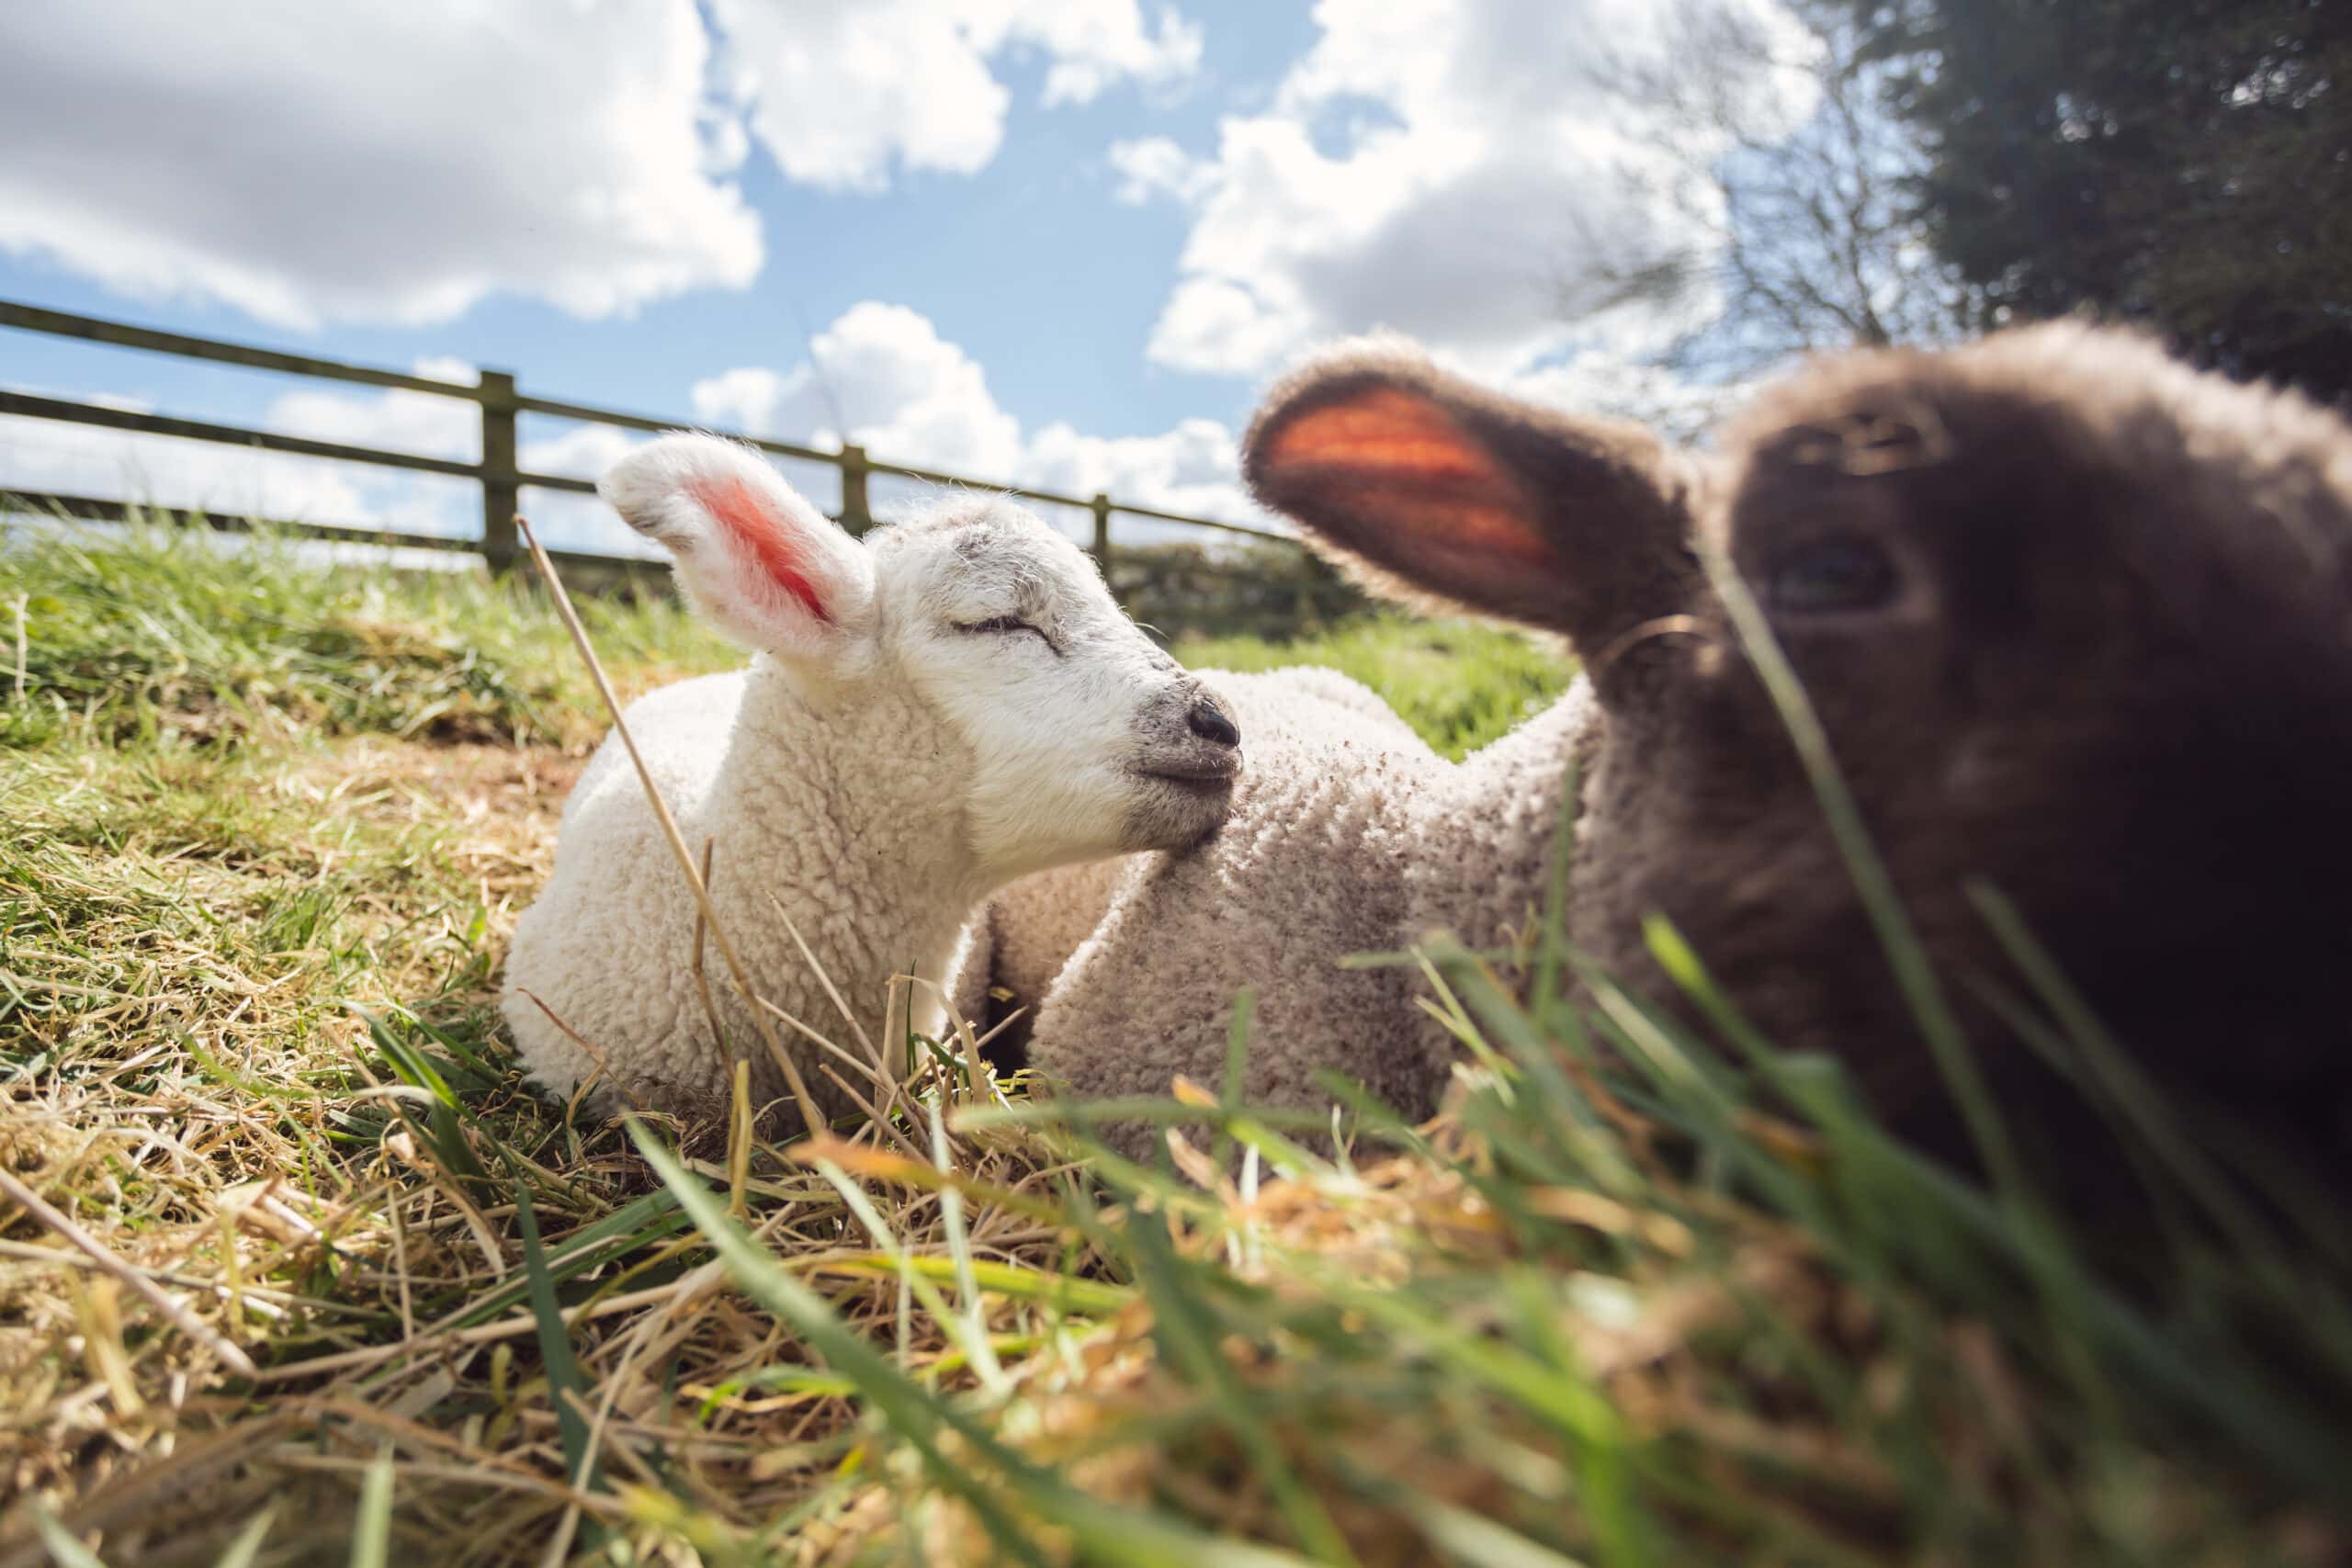 Two Previously Abandoned Lambs Lie On Grass In The Sunshine Together At Their New Home Surge Sanctuary.